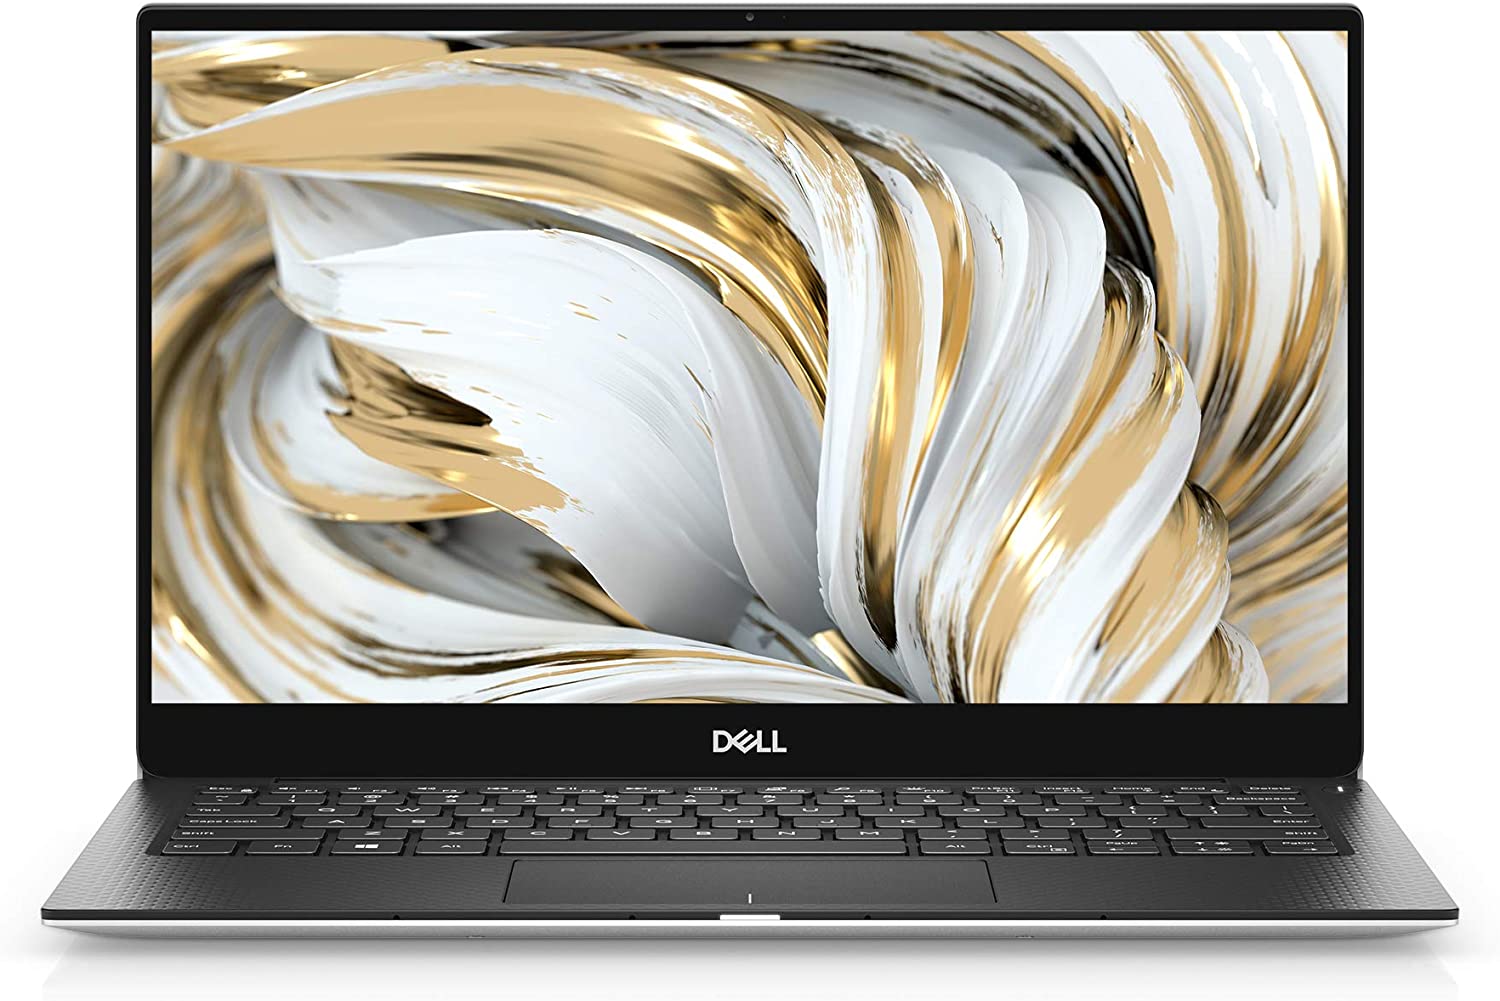 Dell XPS 13 9305 Laptop - 13.3-inch FHD (1920x1080) [...]